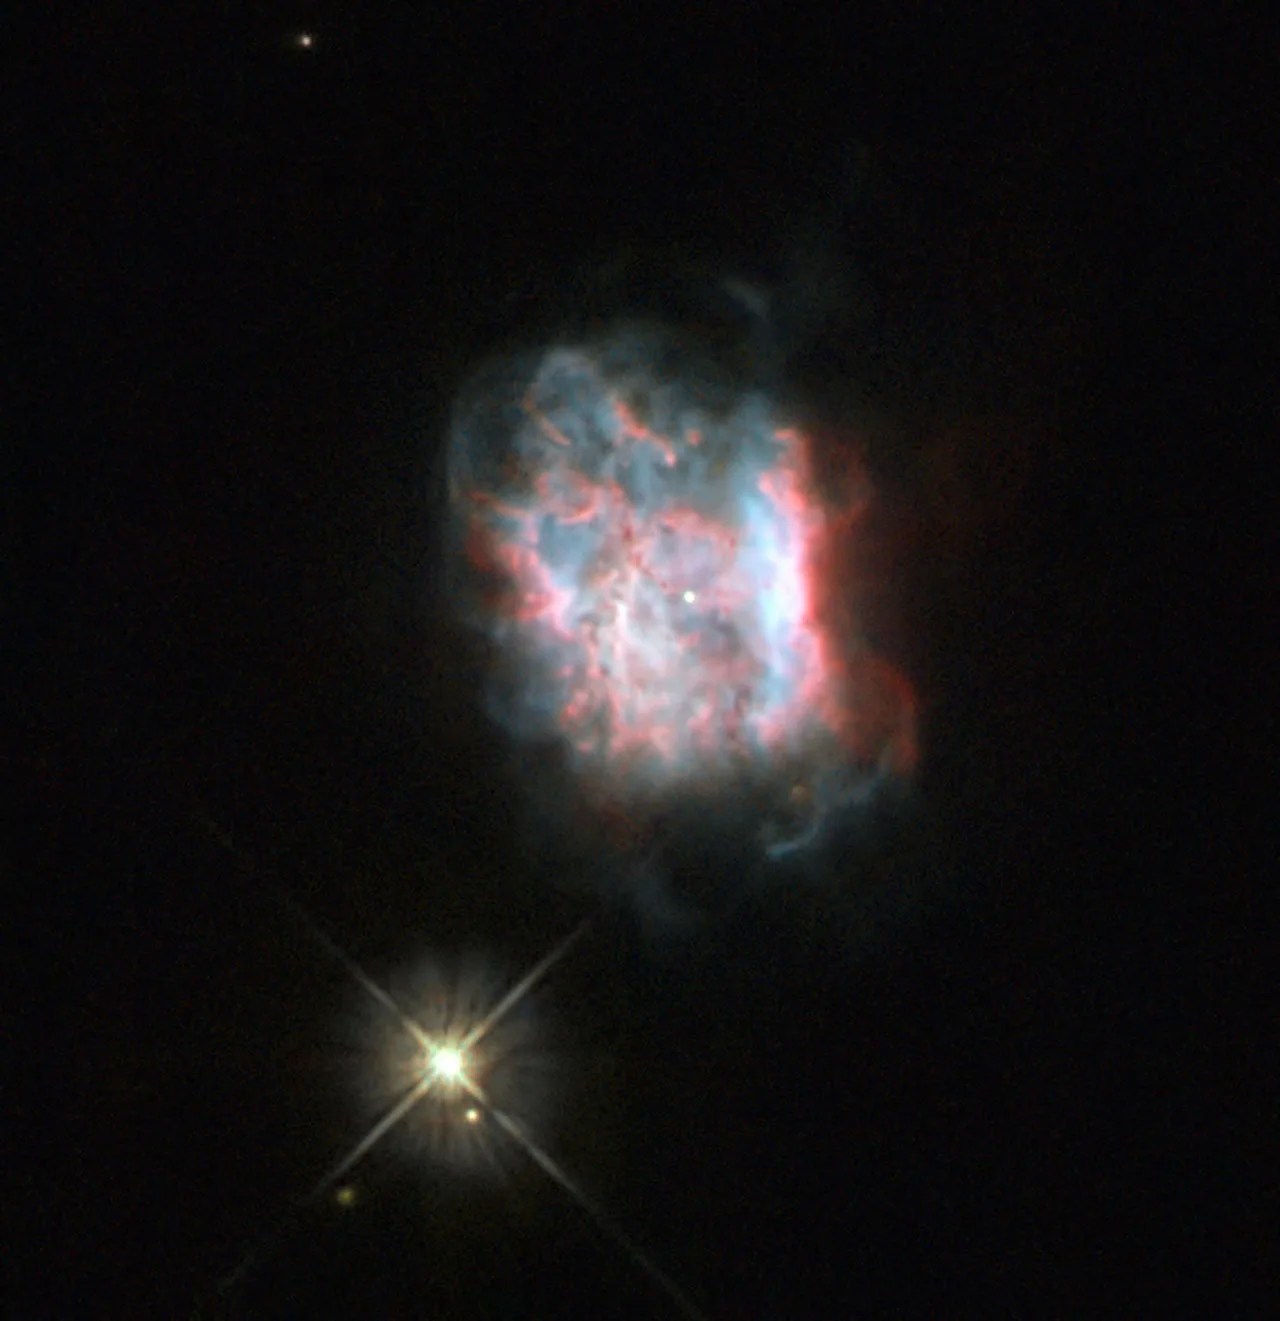 A bright yellow starburst next to a bright, burst star - pink and white tendrils of gas dissipate away from a central glowing disc